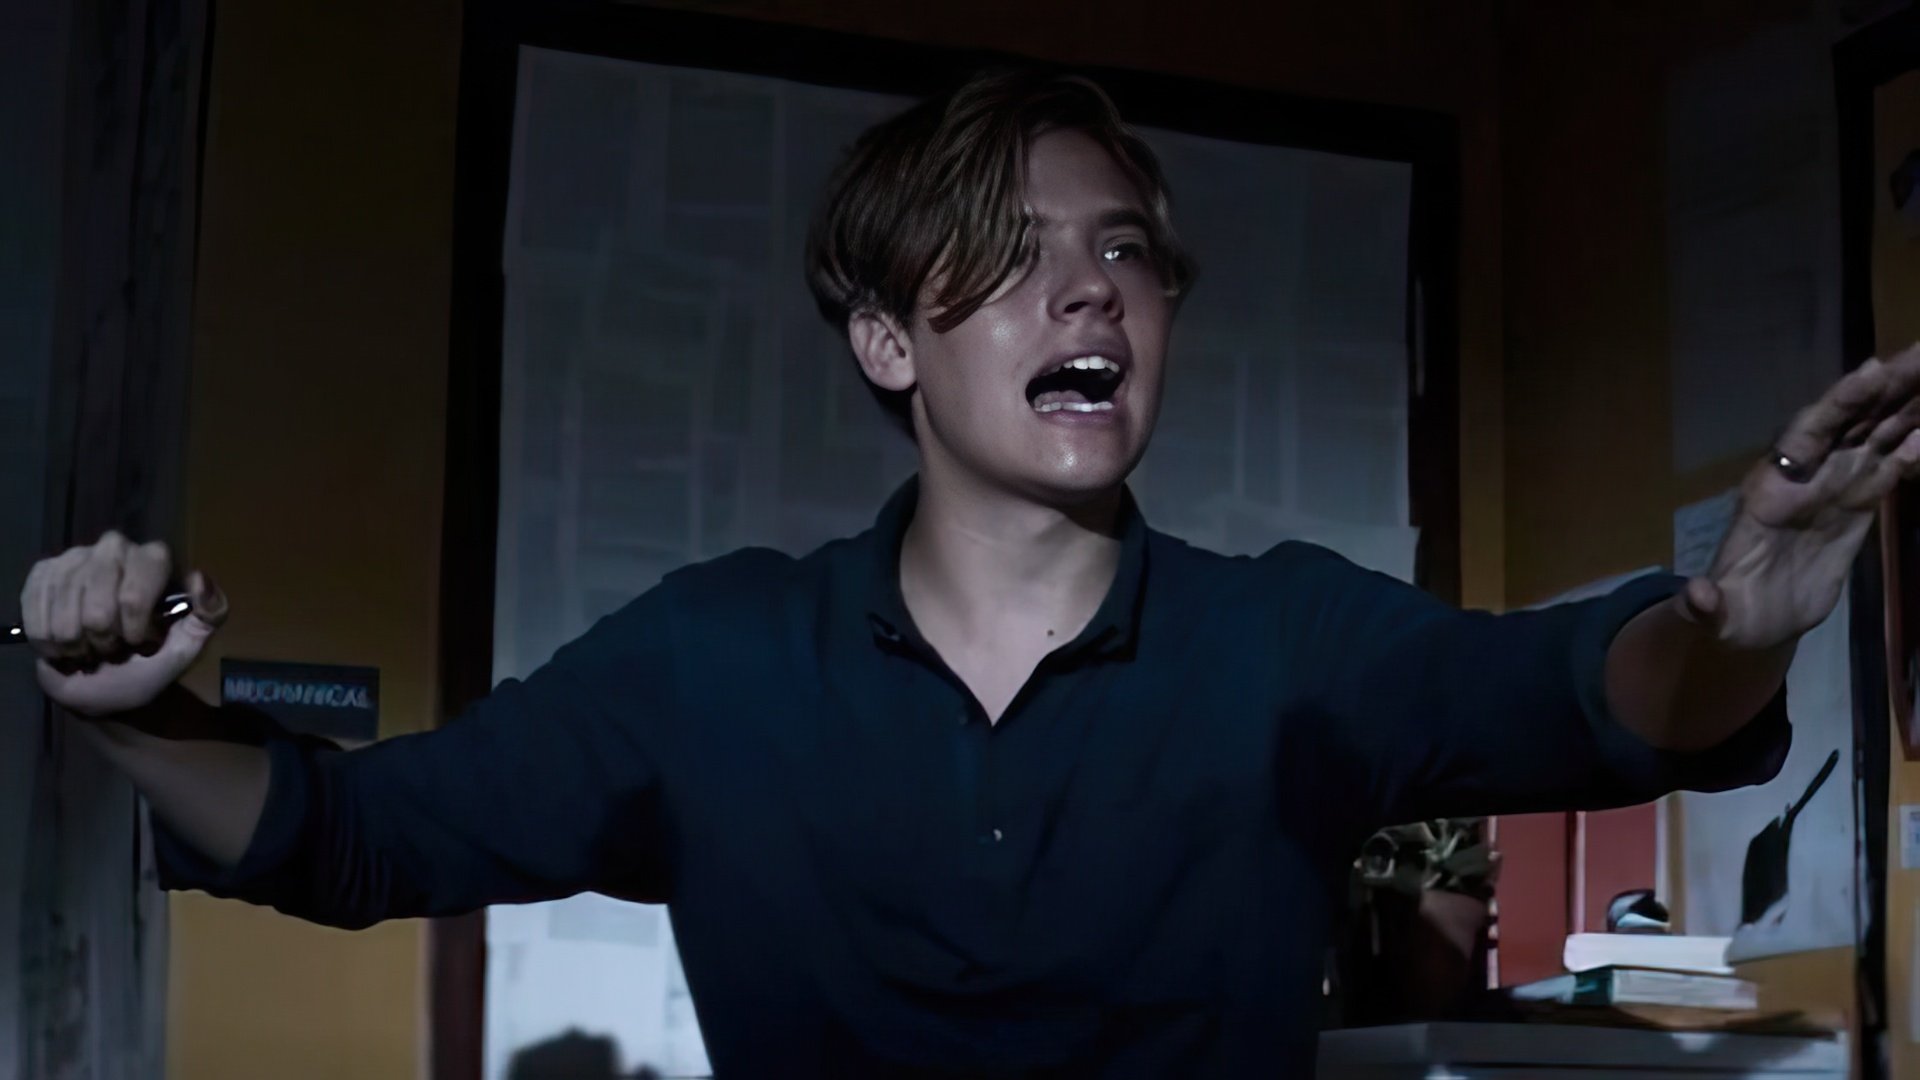 Dylan Sprouse in the movie 'Dismissed'